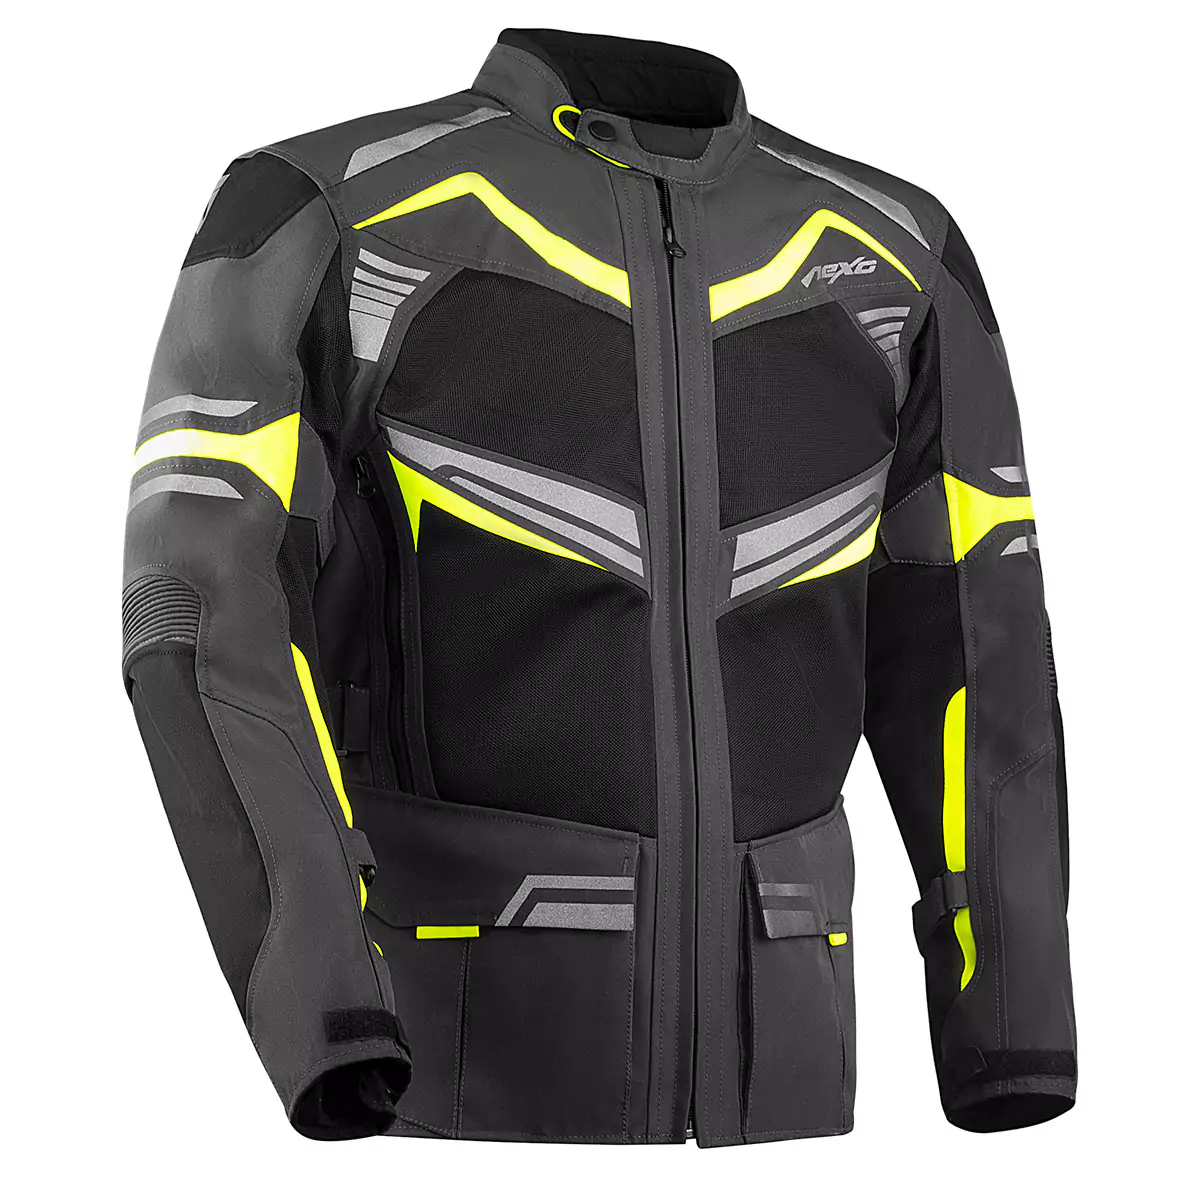 Textile motorcycle jacket with protective padding and reflective accents.